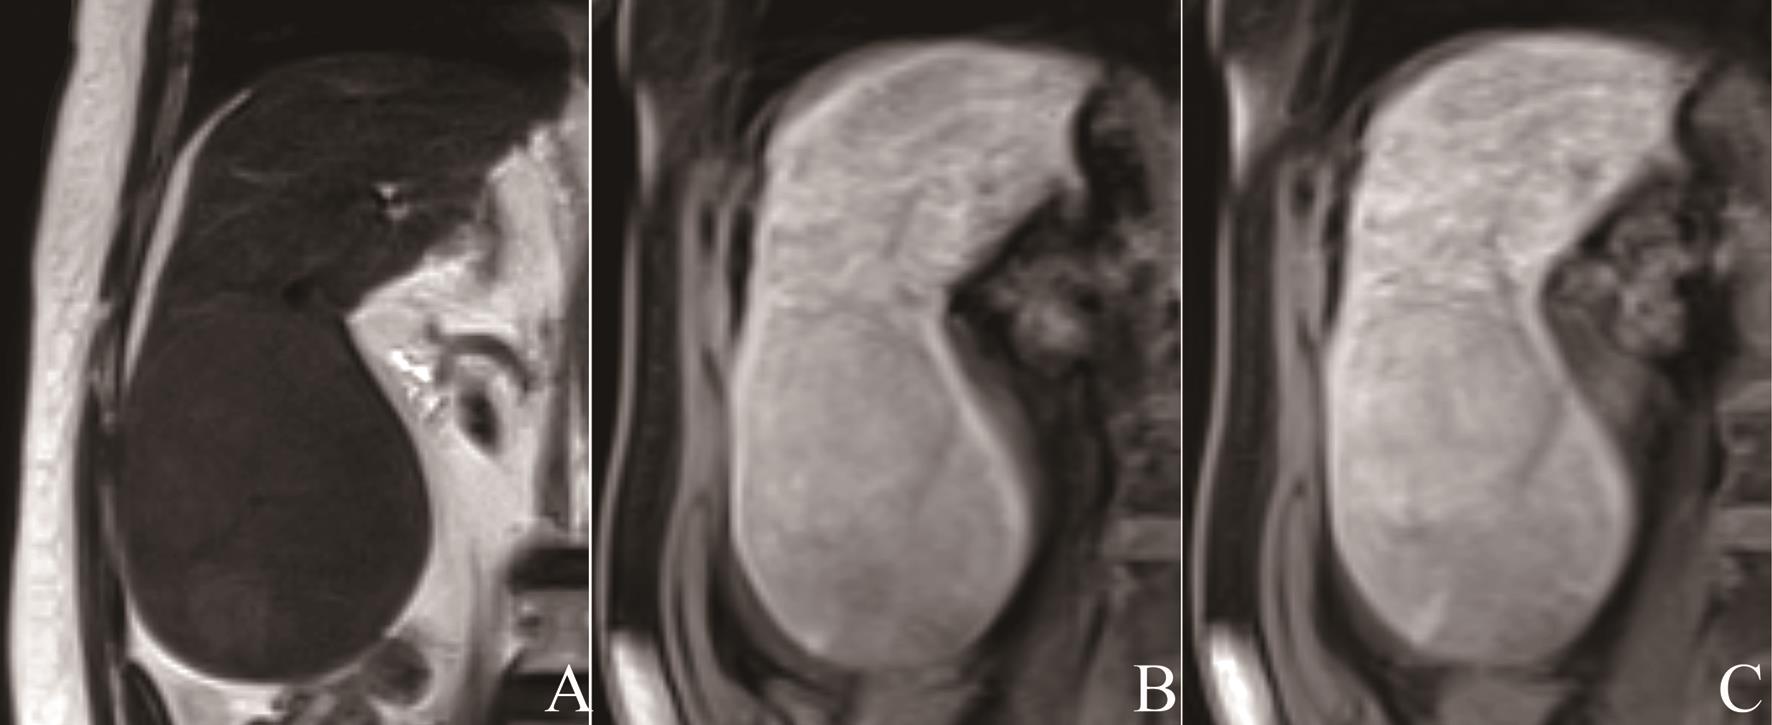 Follow-up contrast-enhanced MRI with gadoxetic acid.